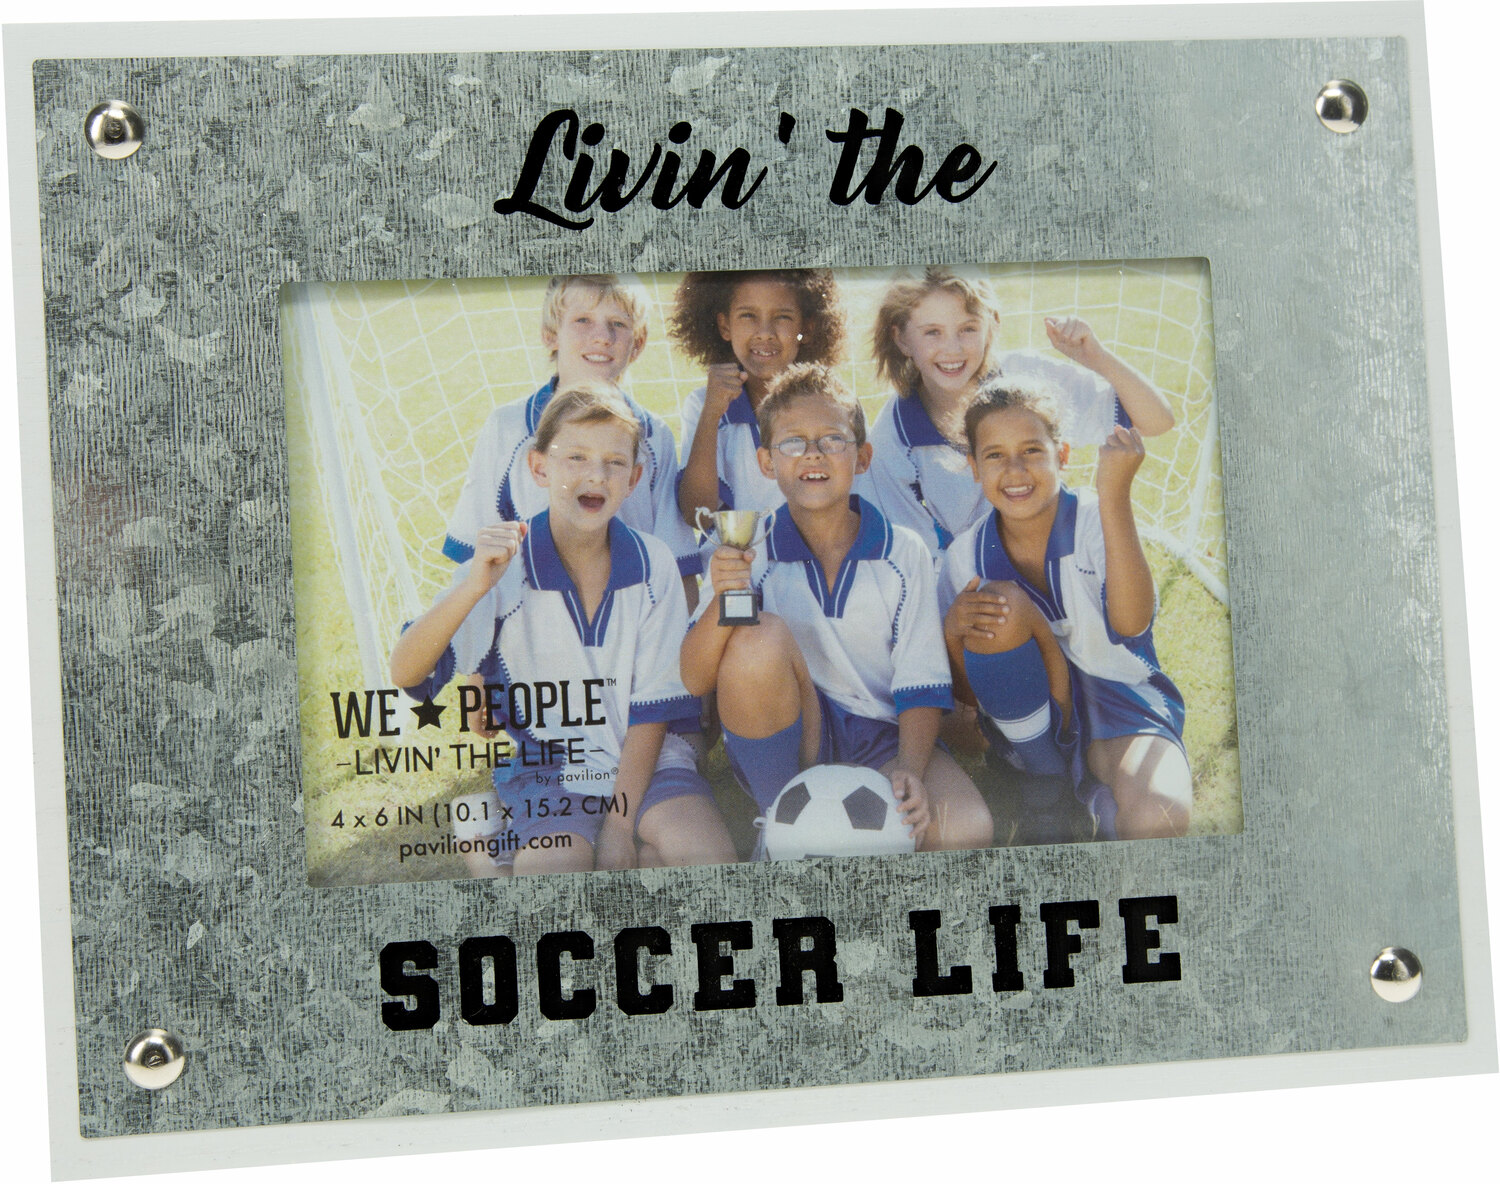 Soccer by We People - Soccer - 8.5" x 6.5" Frame
(Holds 4" x 6" Photo)